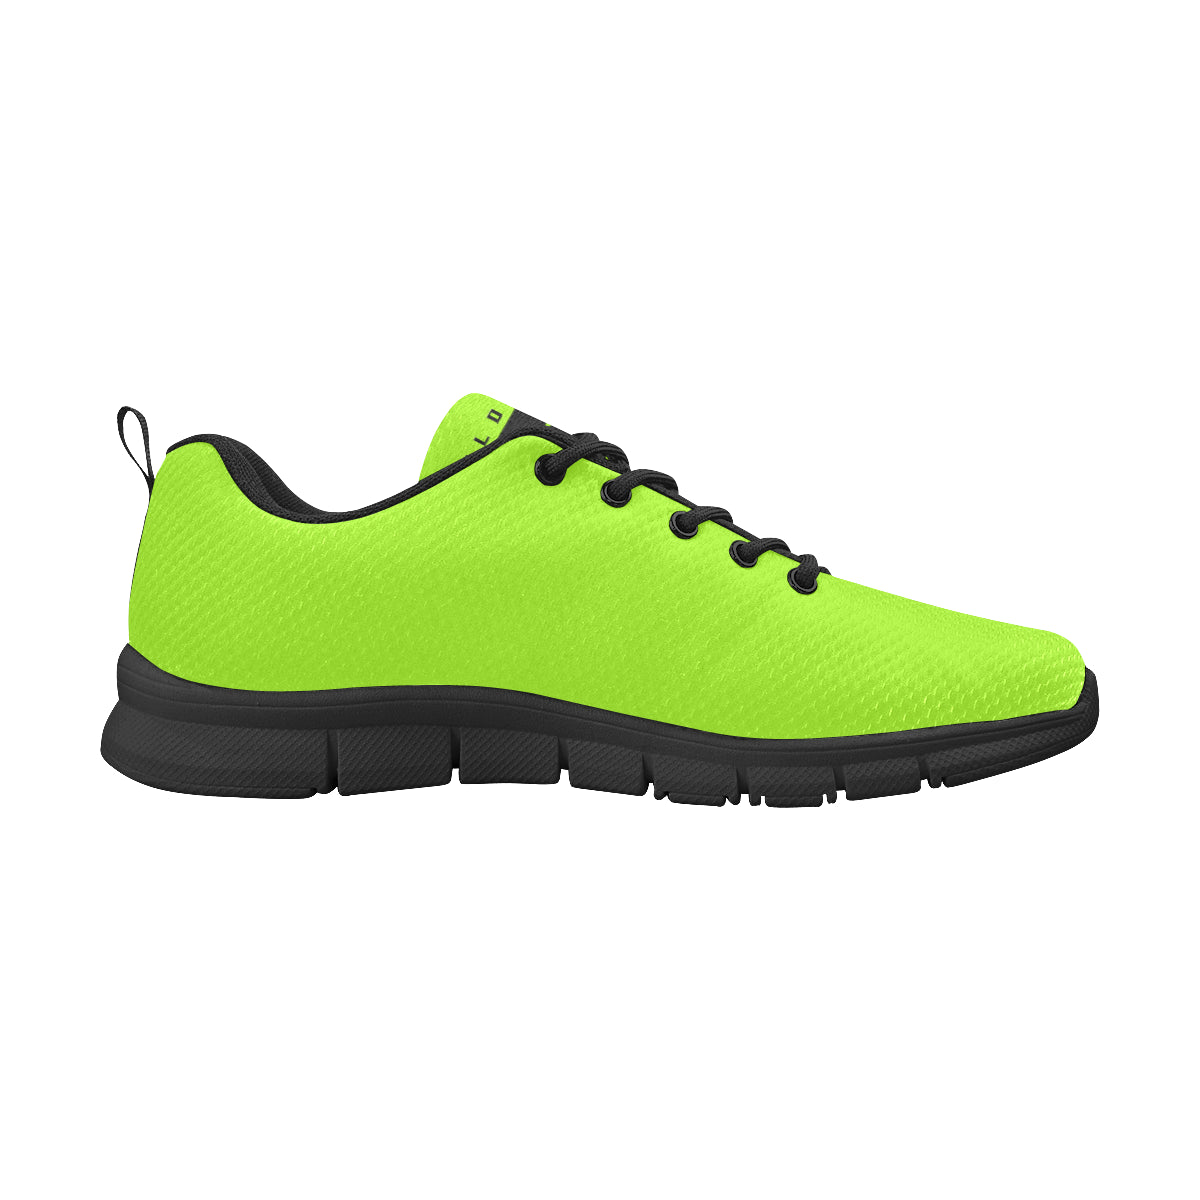 Mens world famous lime green shoes